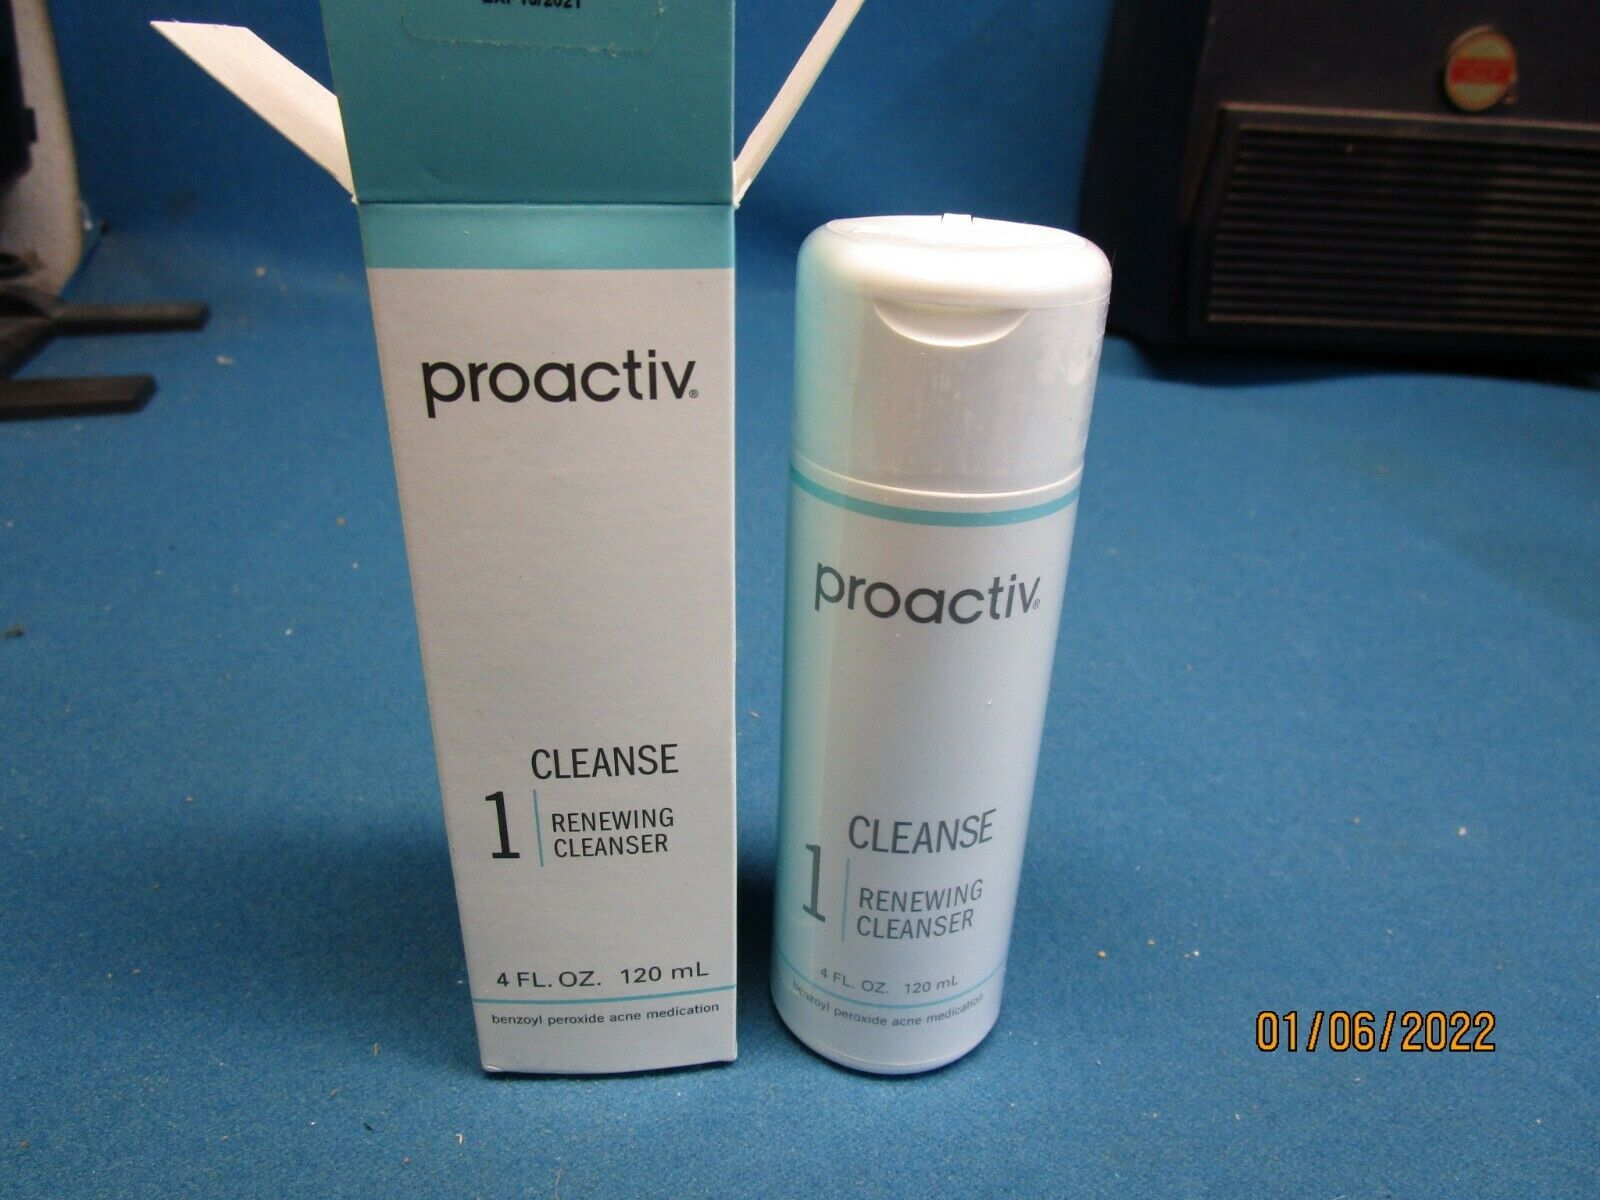 Proactiv #1 Renewing Cleanser 4 fl. oz. New Unopened EXPIRED 10/2021 